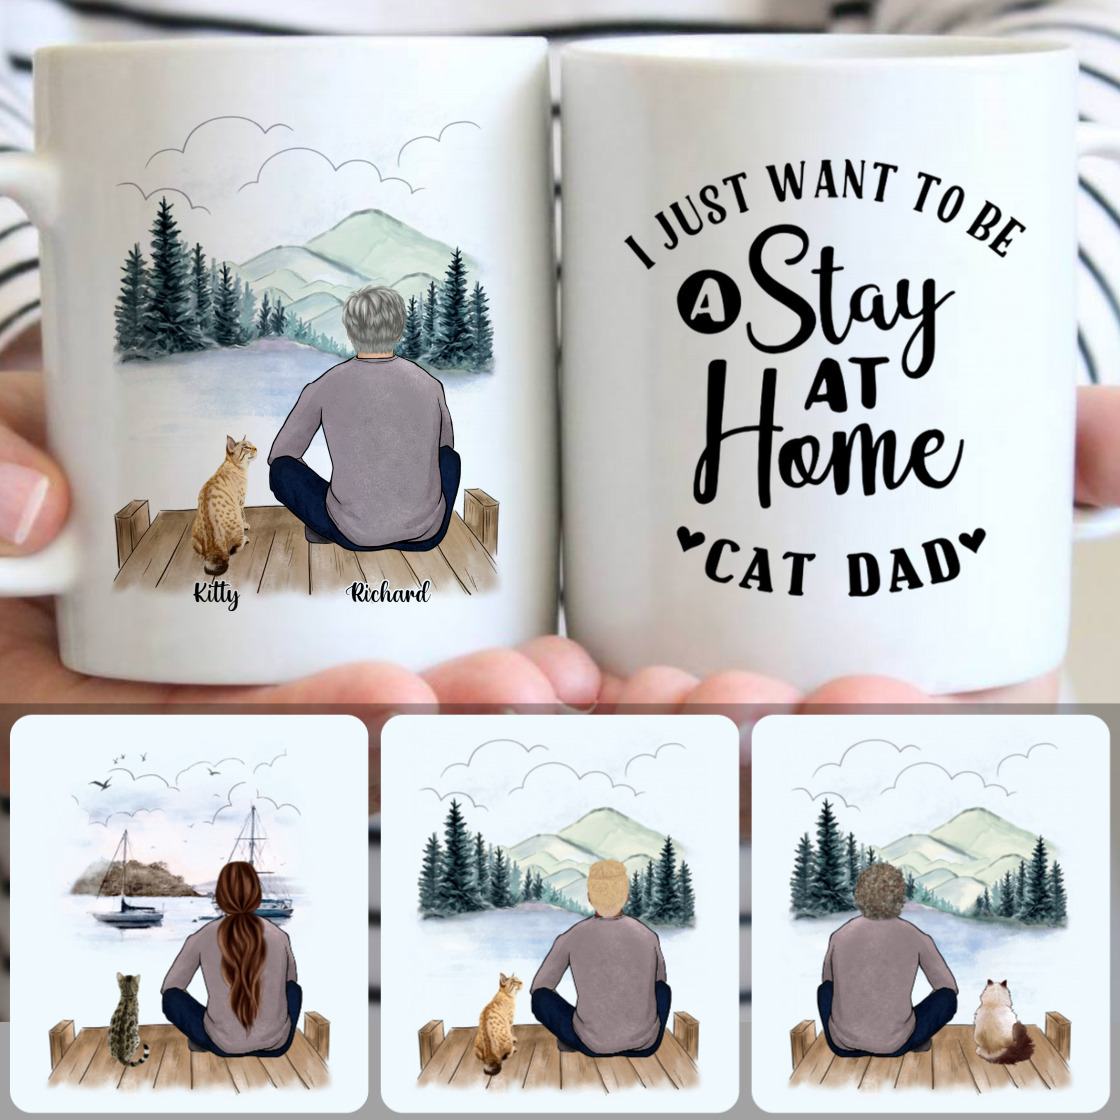 Personalized Mug, Meaningful Gifts For Grandpa Grandfather, Man & Cat Customized Coffee Mug With Names